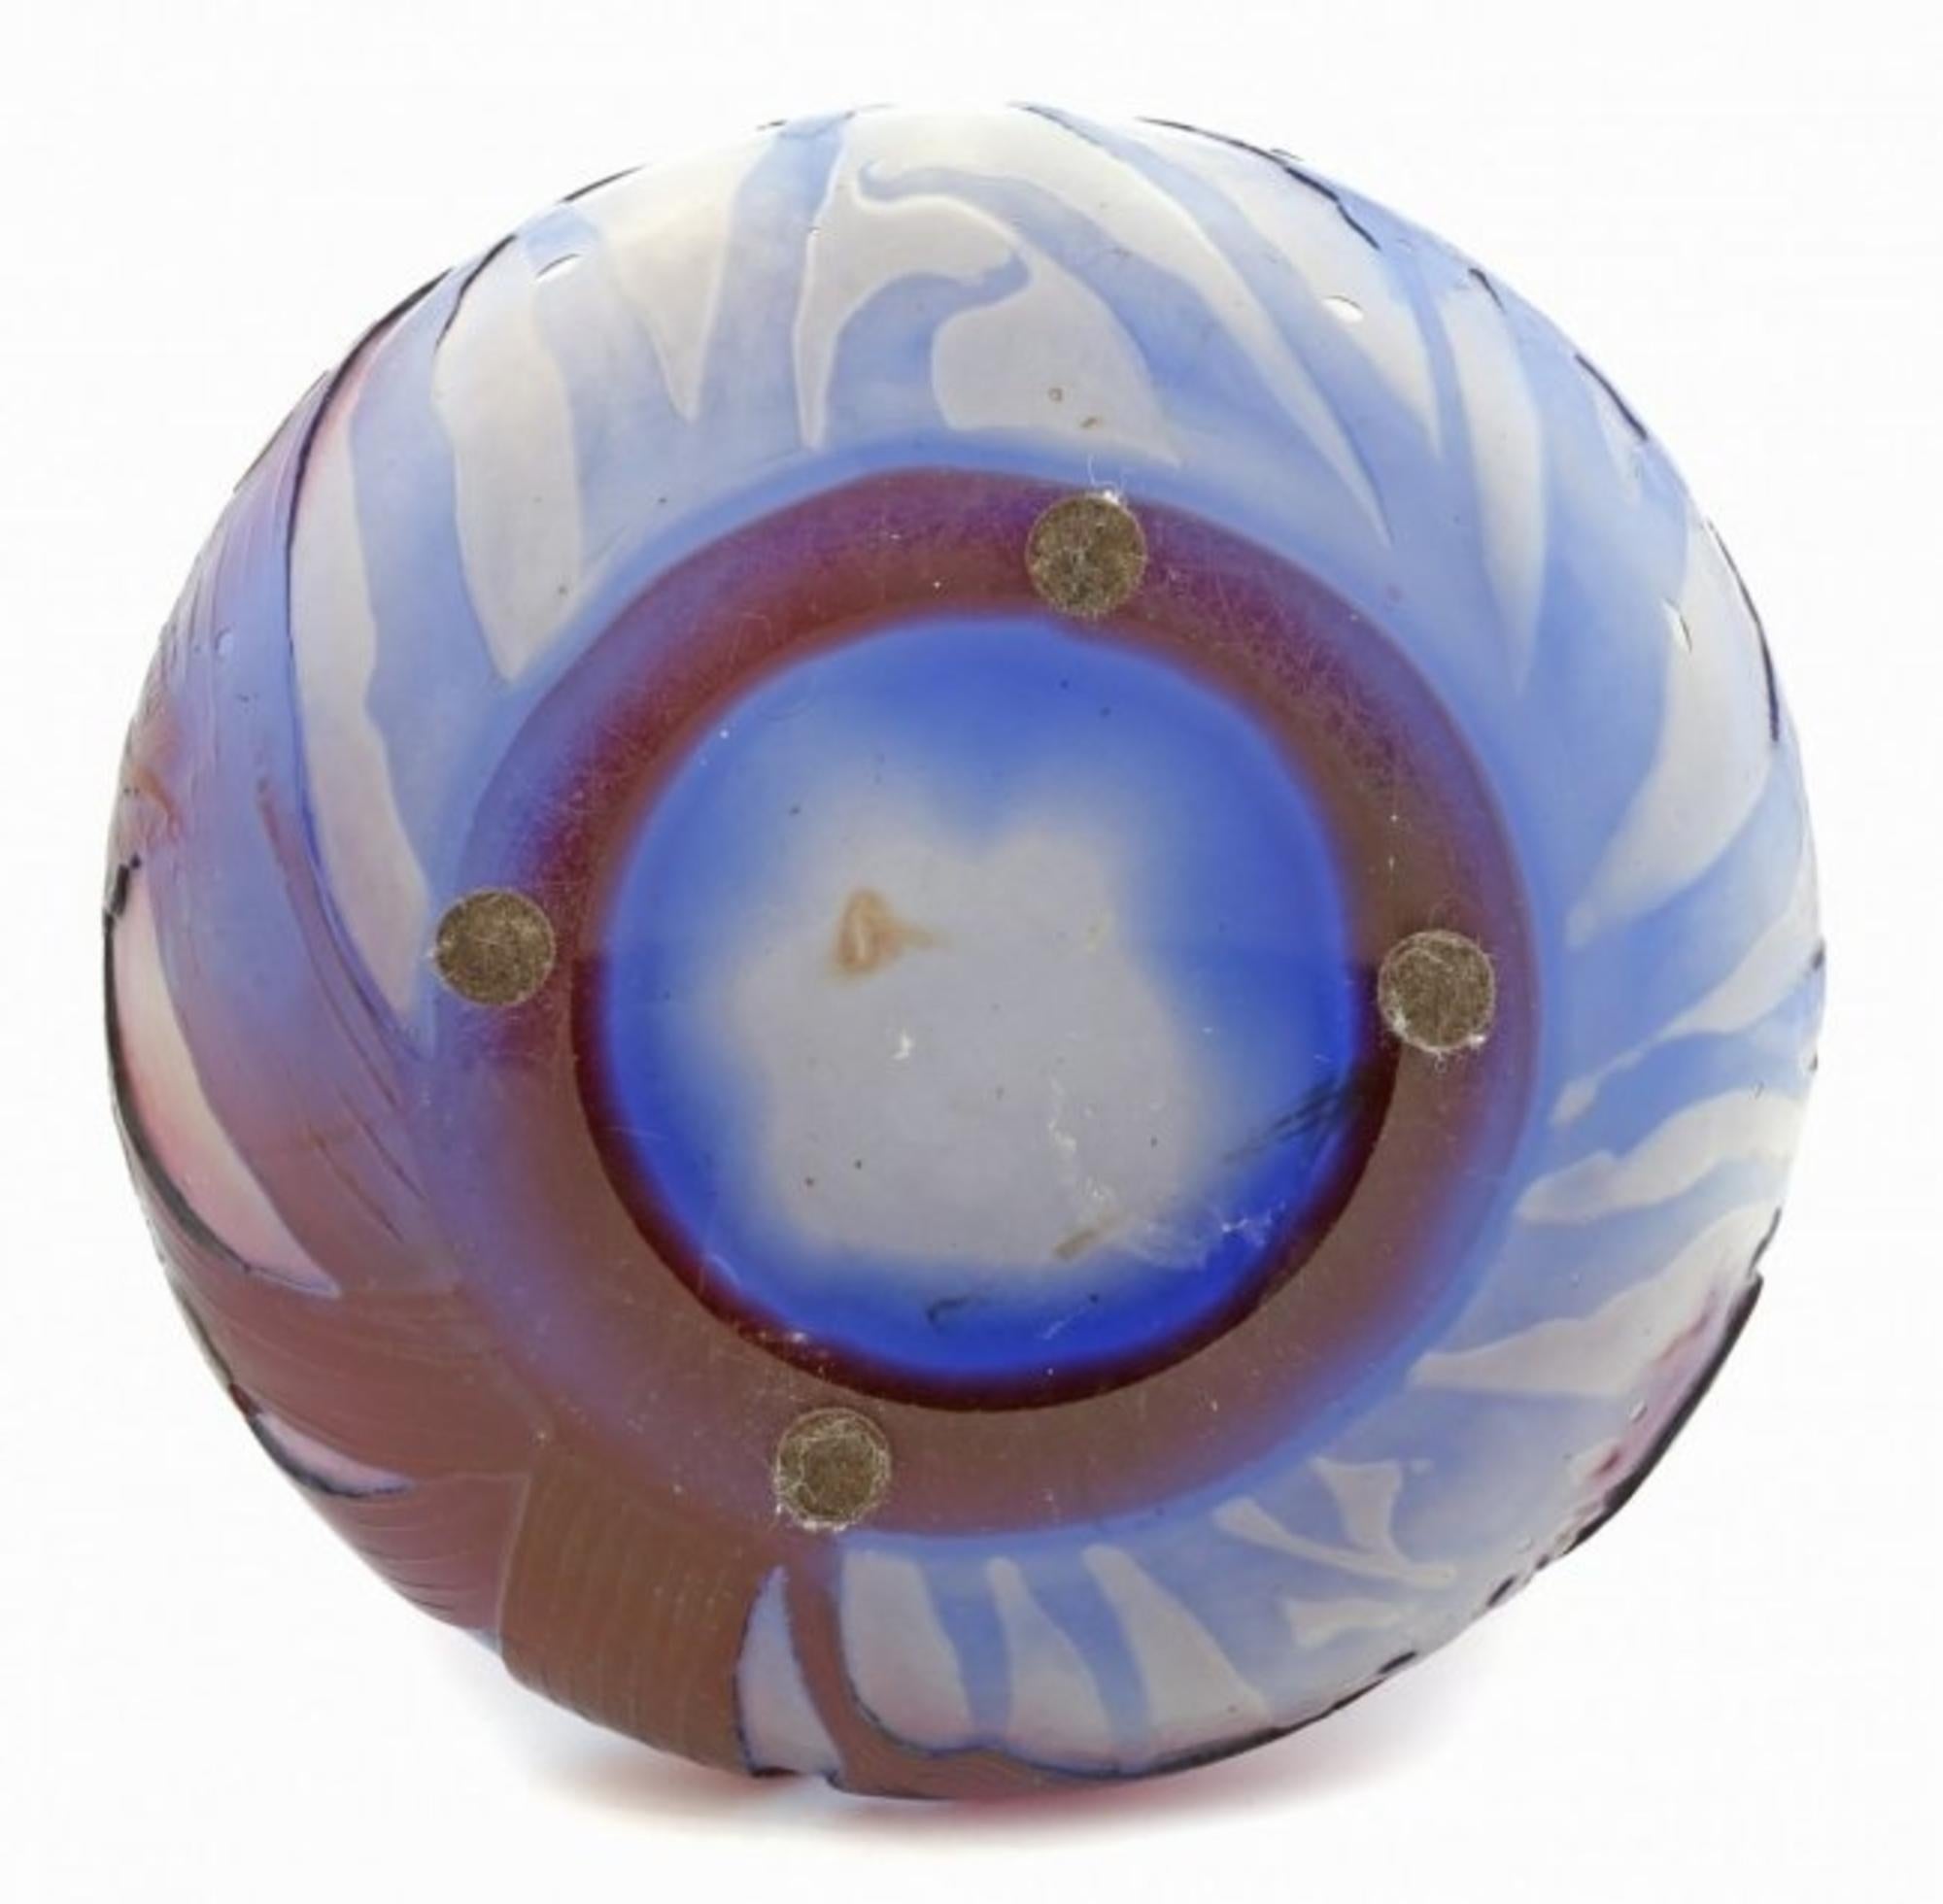 Fine Wheel-Cut and Fire-Polished Cameo Glass Vase, 'Flowers', Signed Gallé In Good Condition For Sale In West Palm Beach, FL